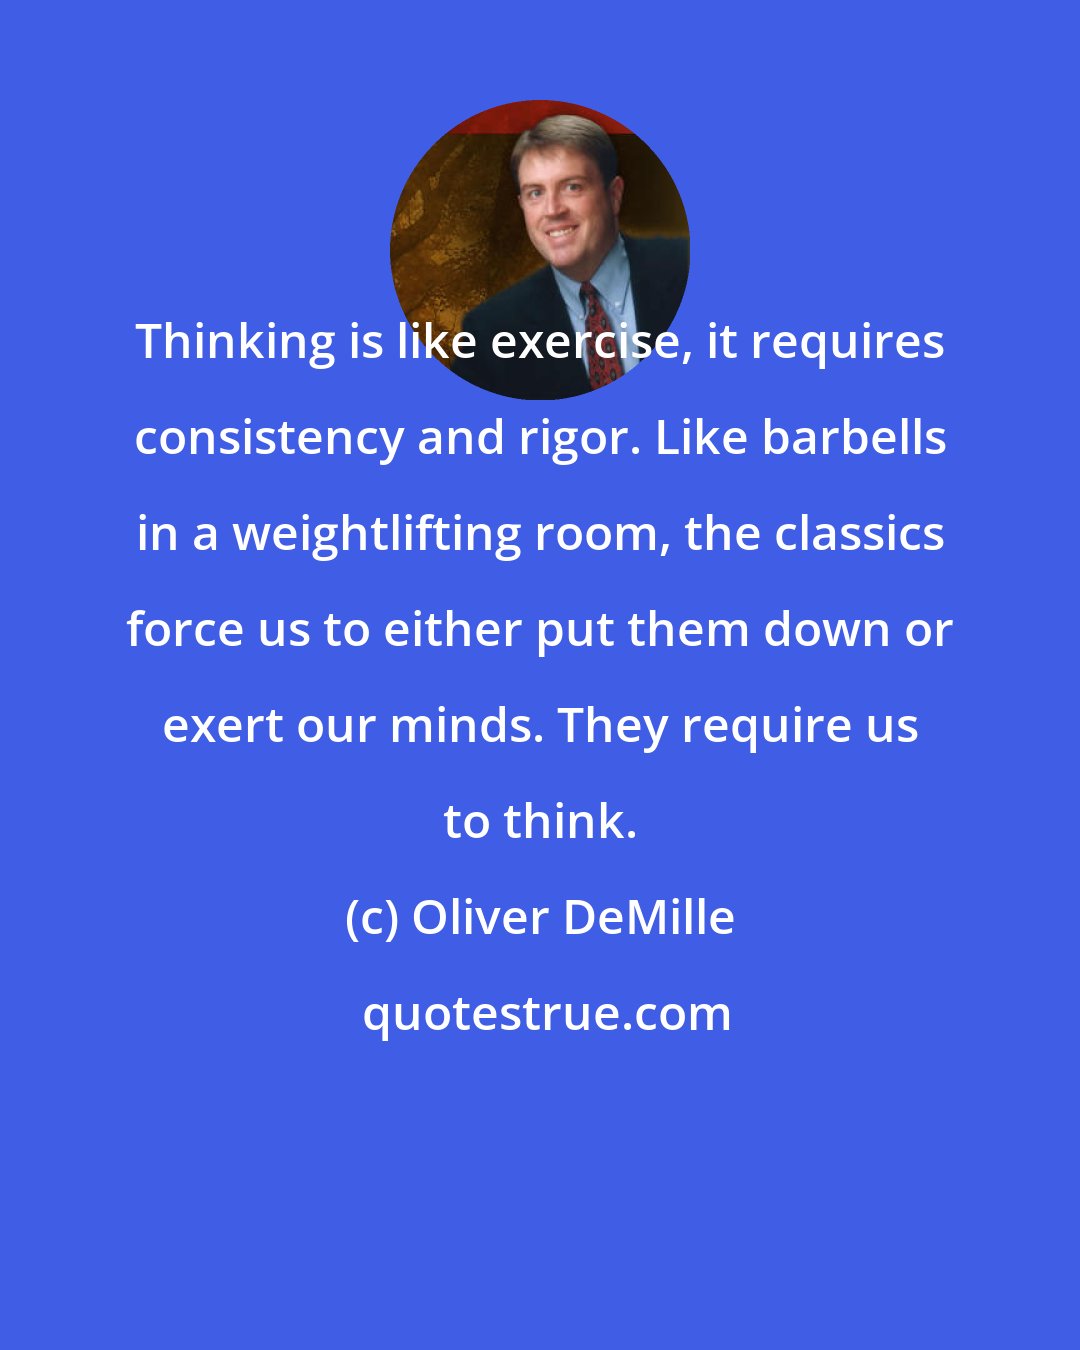 Oliver DeMille: Thinking is like exercise, it requires consistency and rigor. Like barbells in a weightlifting room, the classics force us to either put them down or exert our minds. They require us to think.